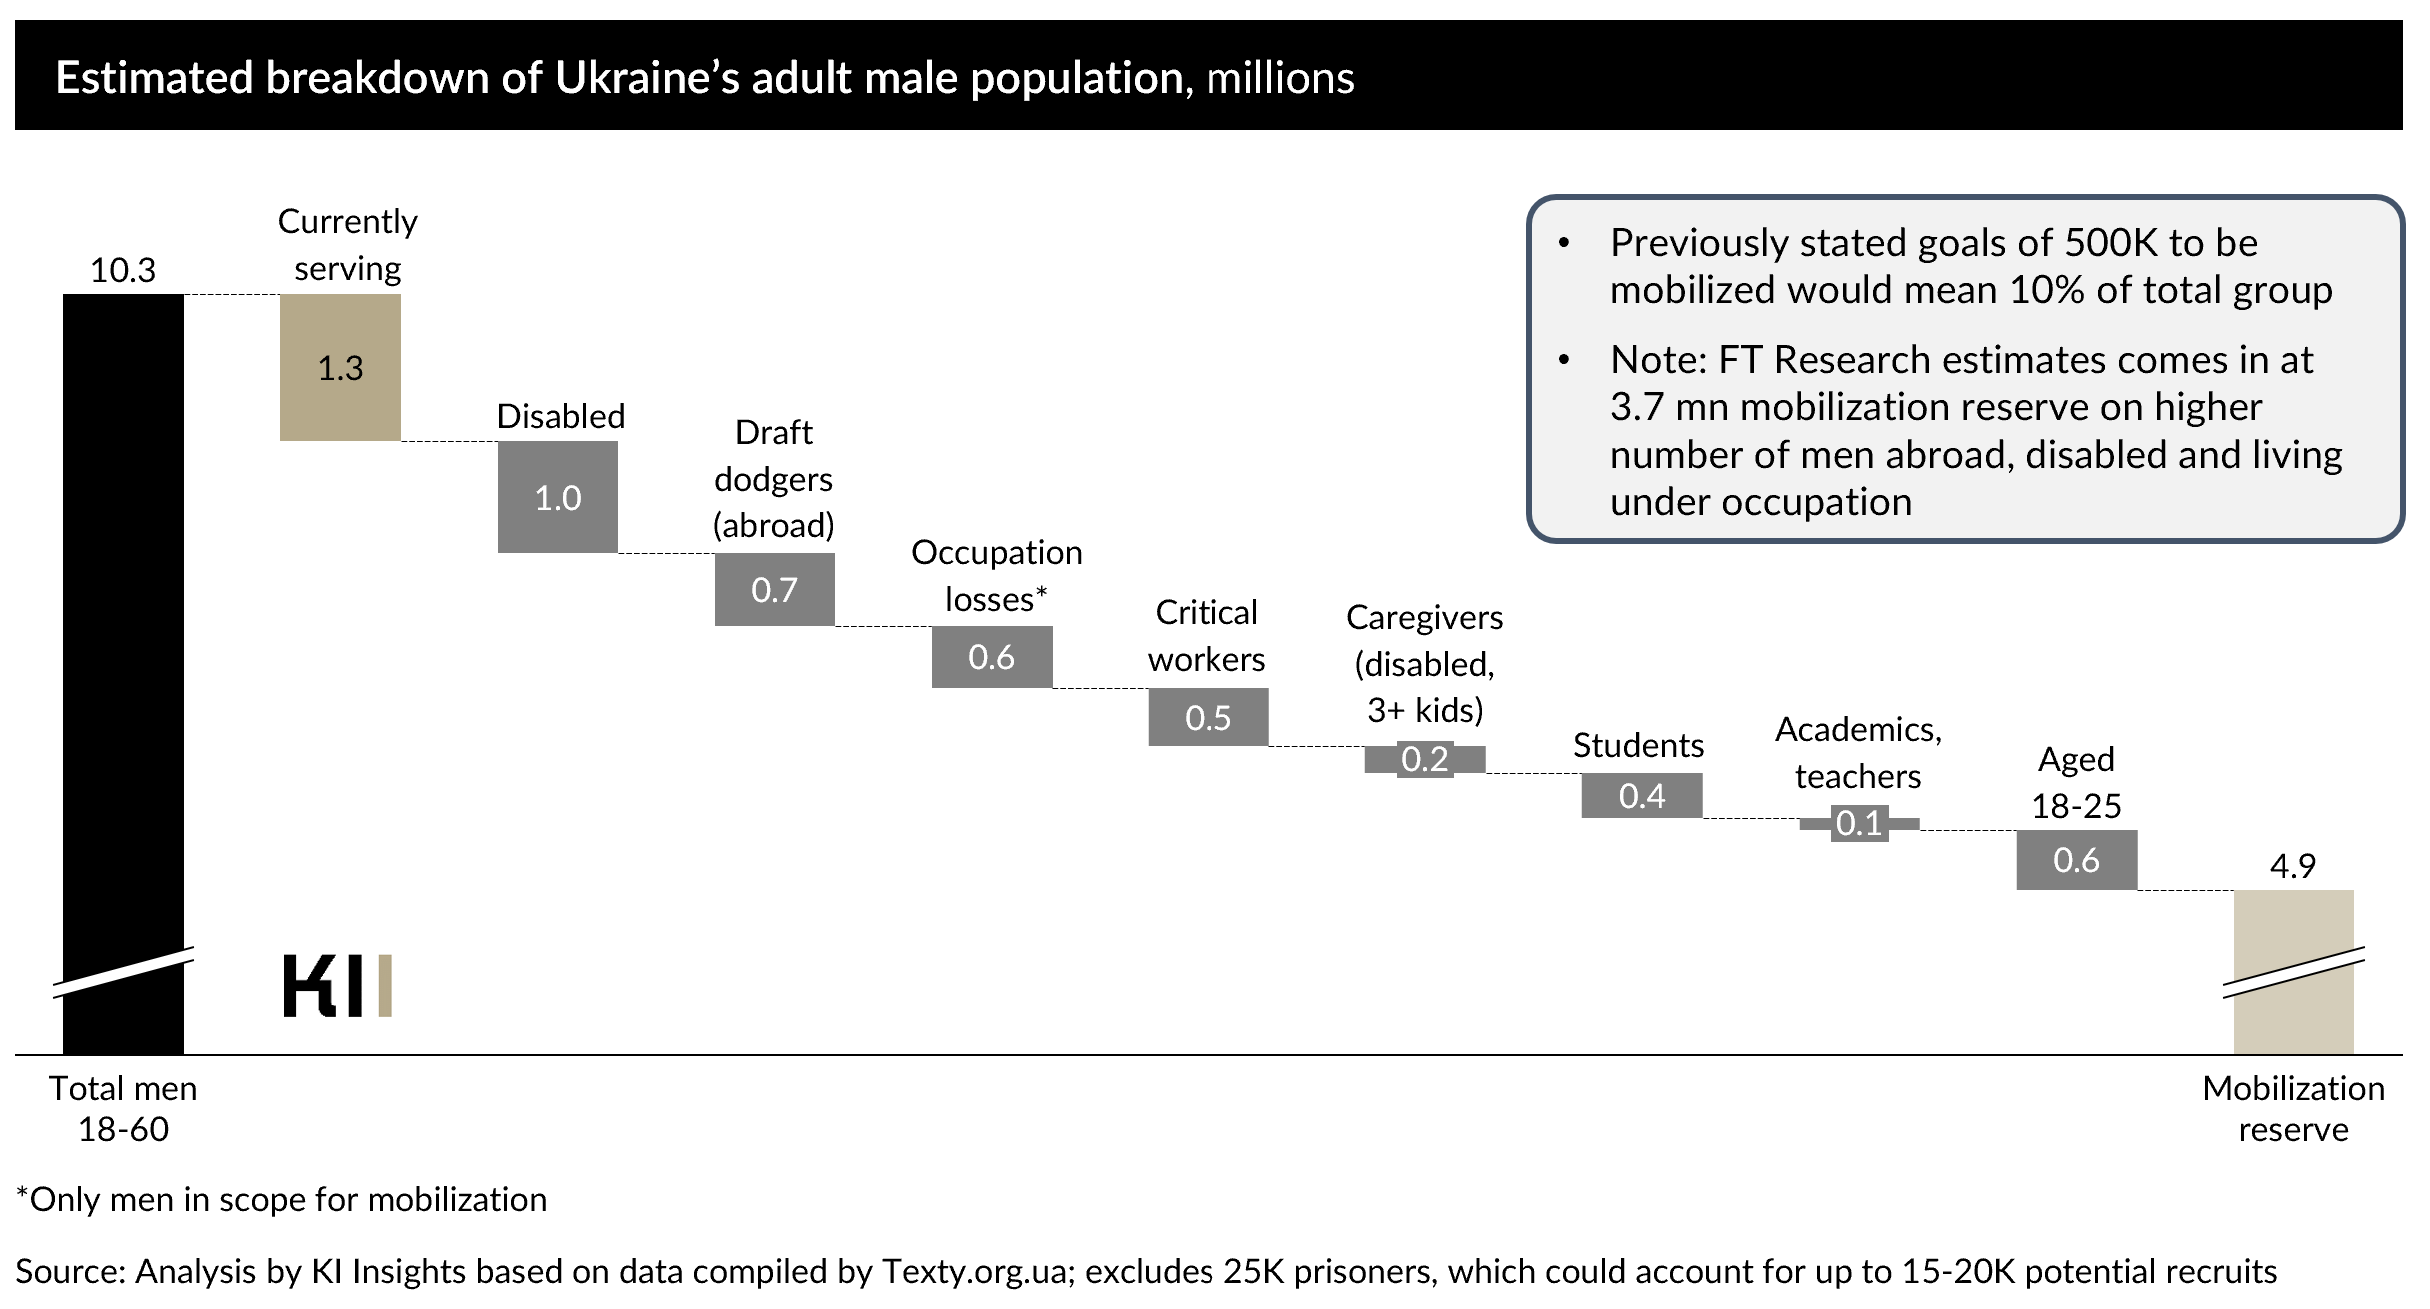 A graph illustrating an estimated breakdown of Ukraine's adult male population in millions. 